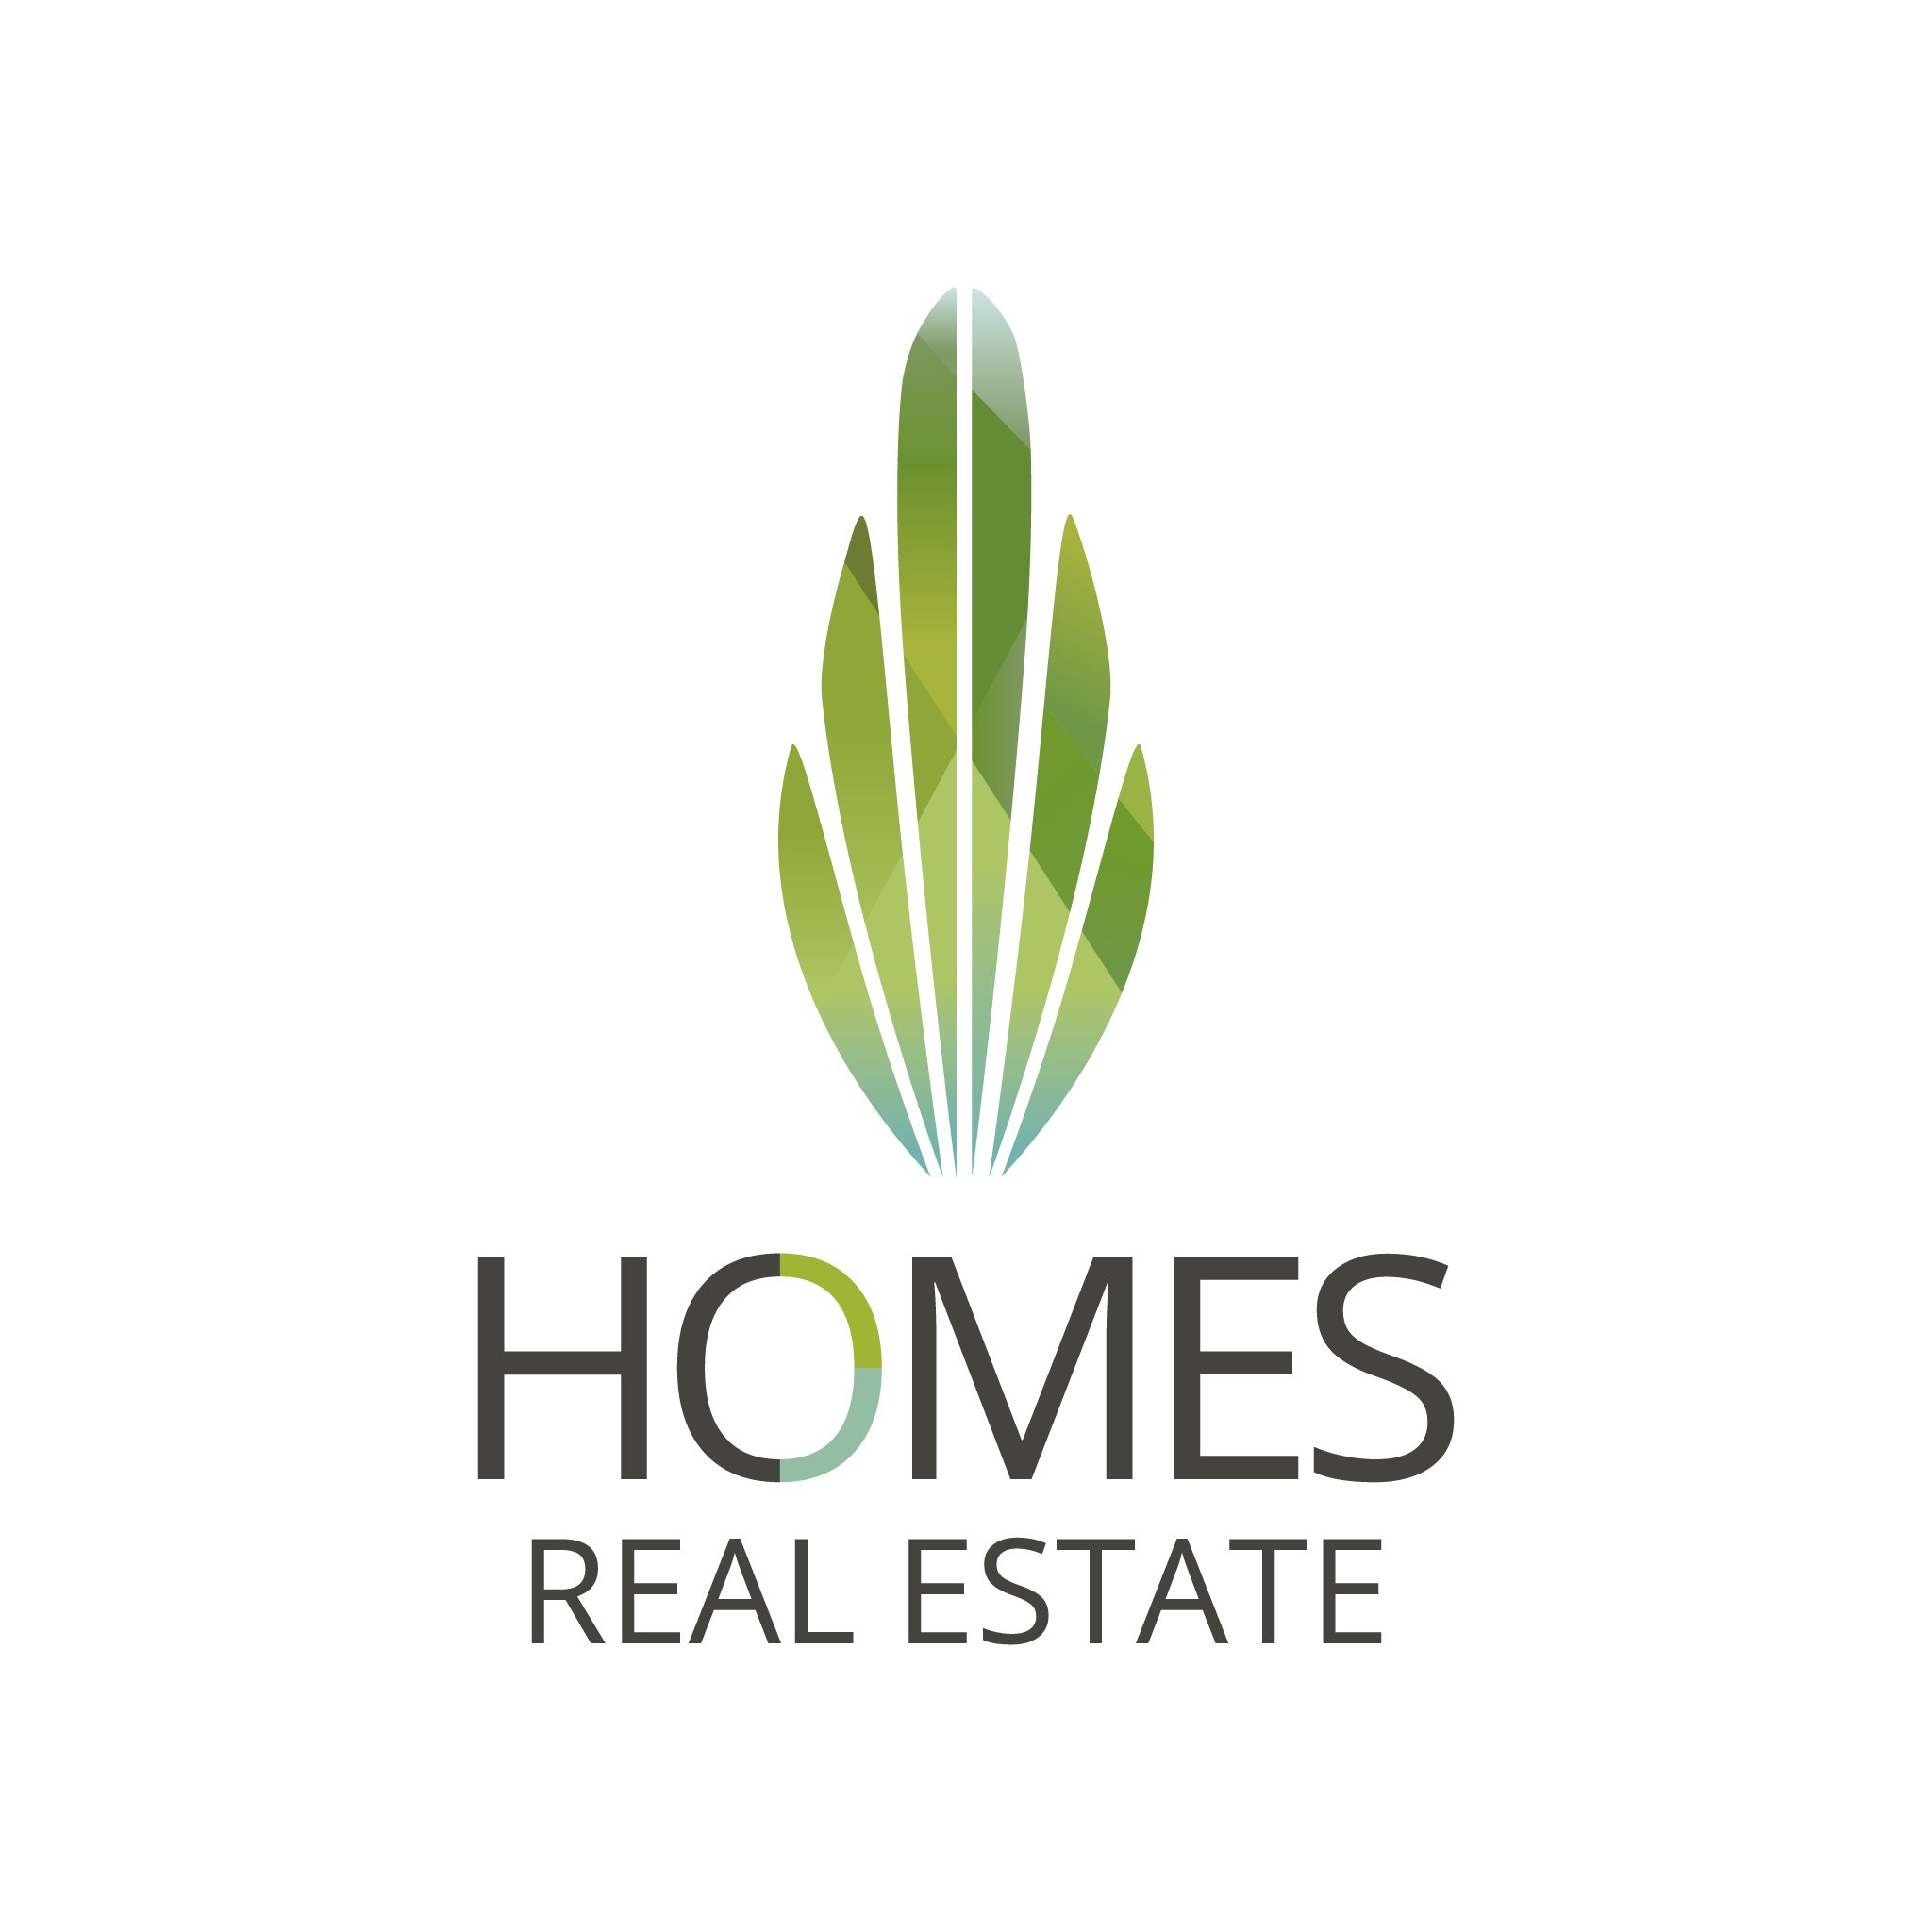 HOMES is your gate to all new developments in Egypt, providing all updated real estate news at your fingertips.